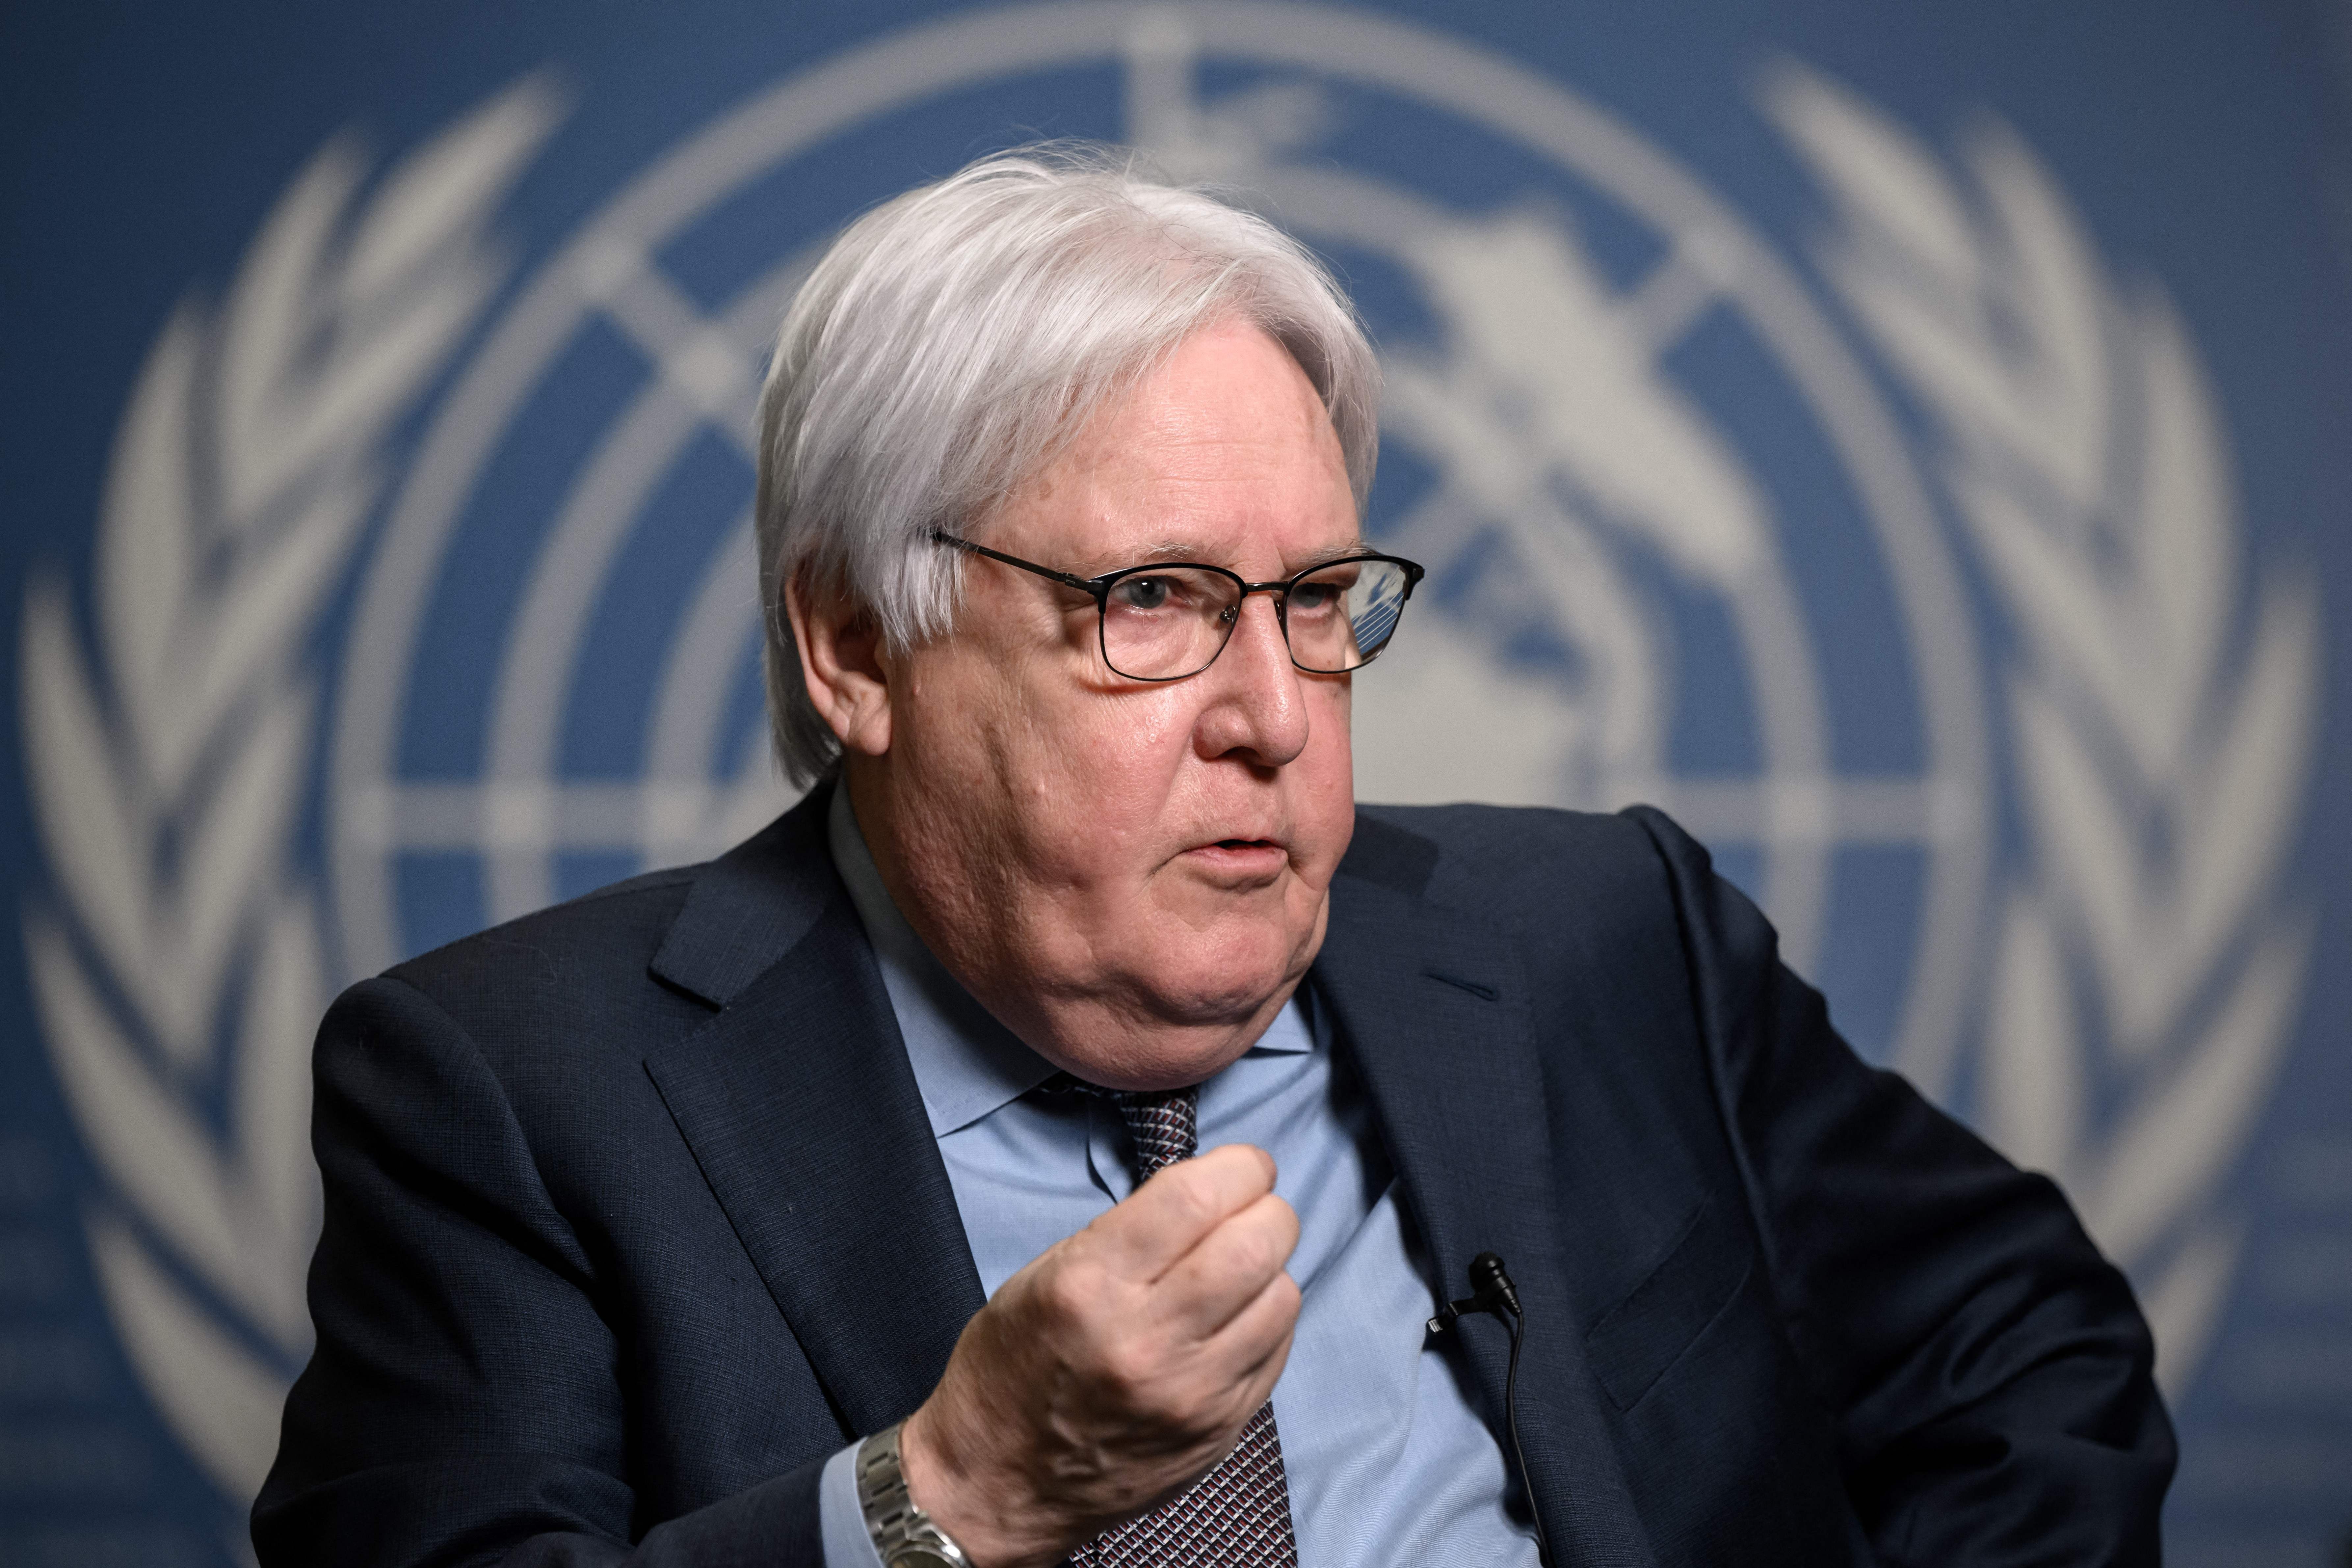 Martin Griffiths, United Nations under-secretary-general for Humanitarian Affairs and Emergency Relief Coordinator, in Geneva on March 3.